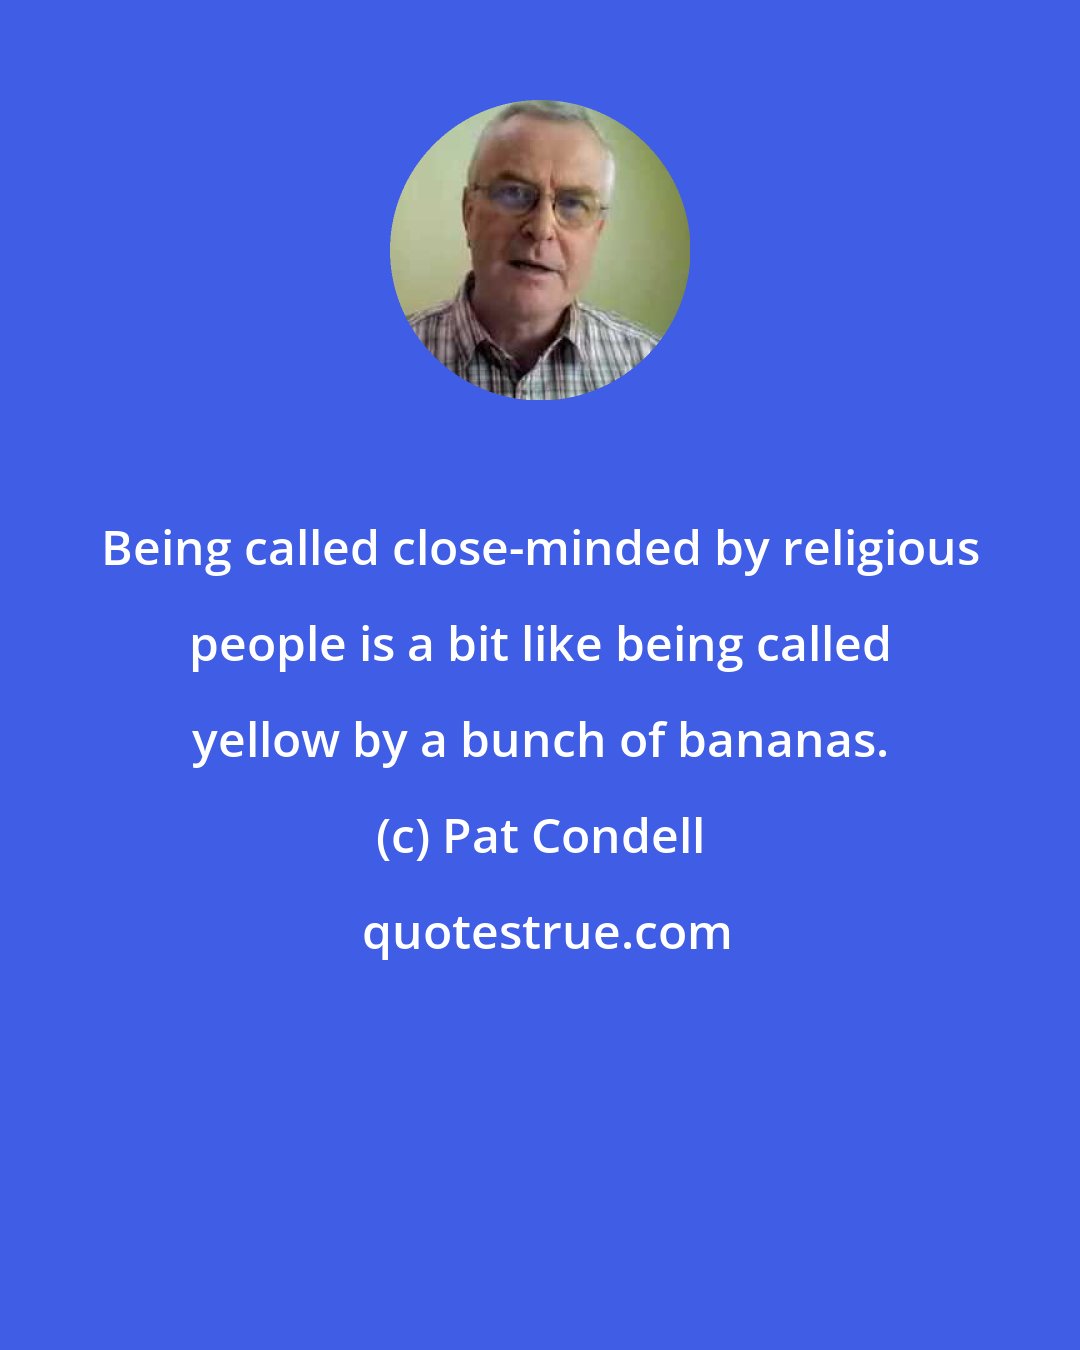 Pat Condell: Being called close-minded by religious people is a bit like being called yellow by a bunch of bananas.